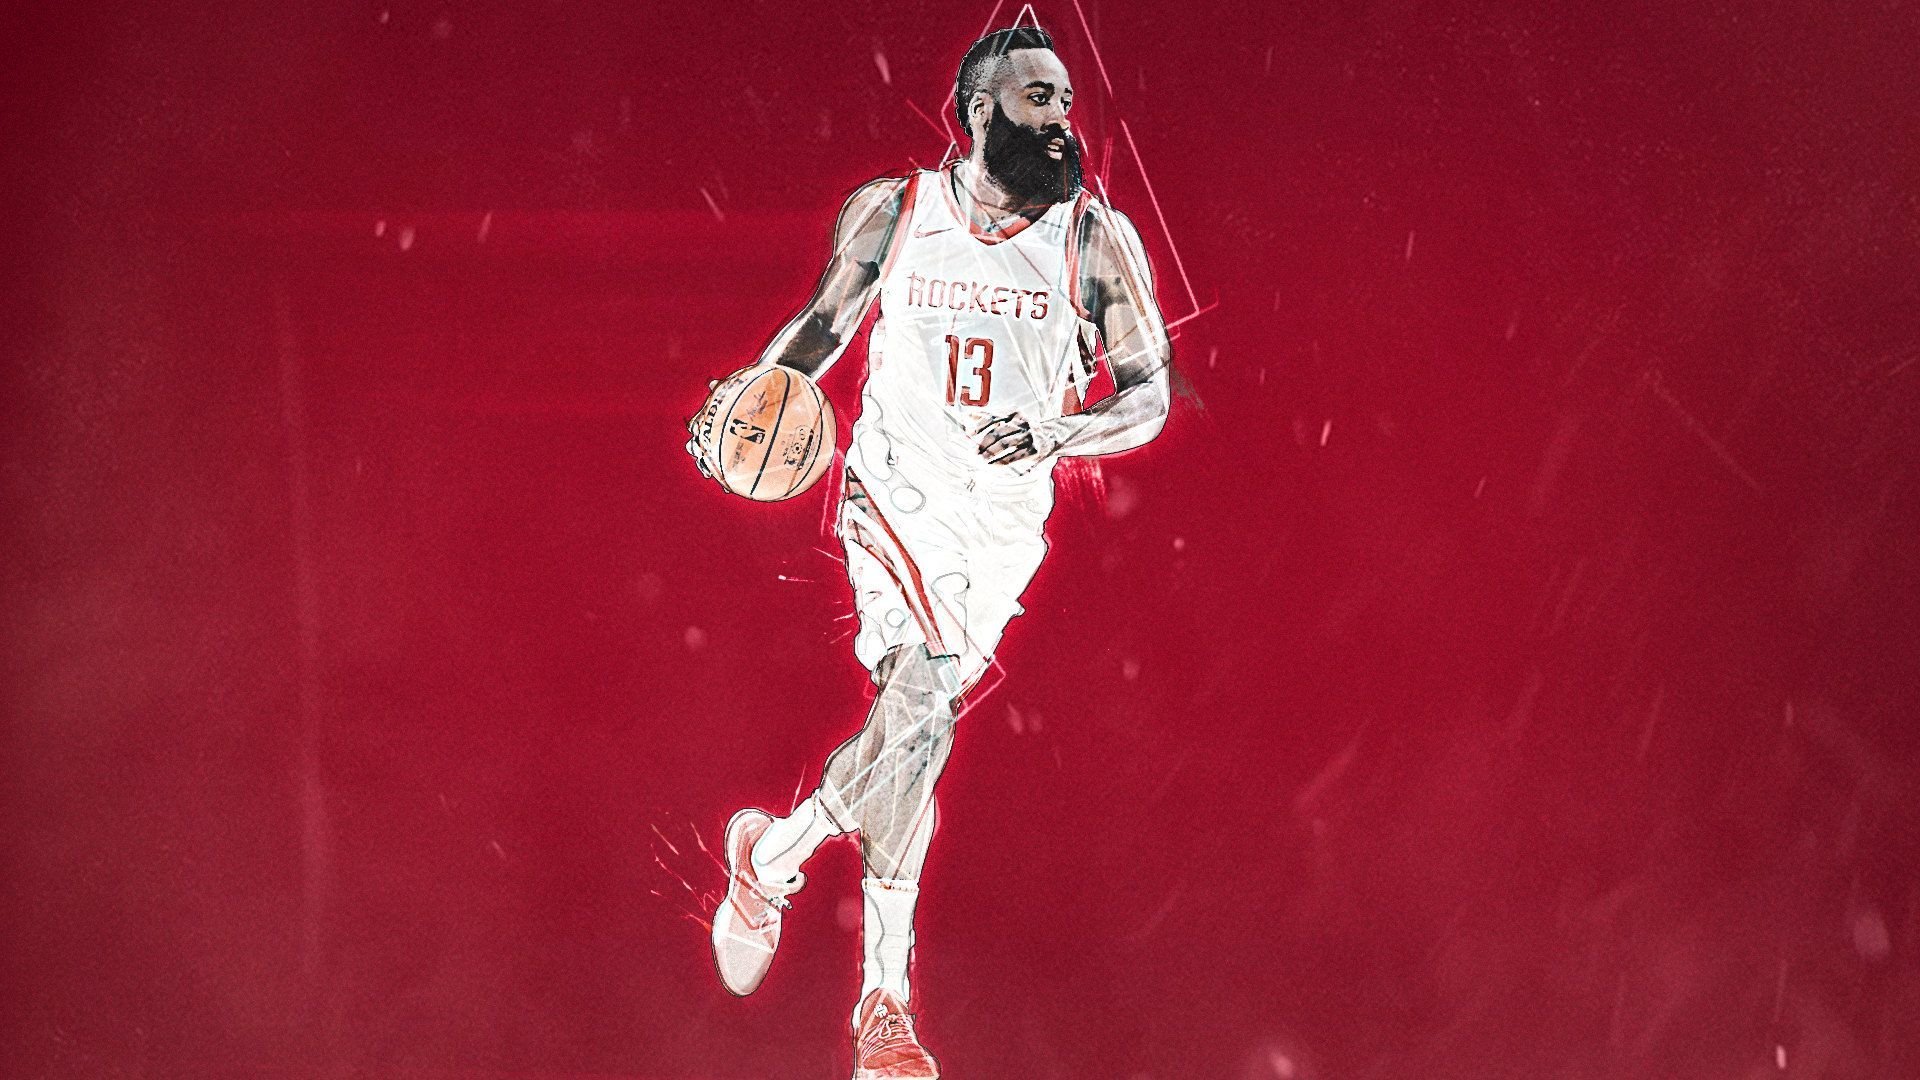 Houston Rockets guard James Harden is one of the top candidates for the NBA's Most Valuable Player award. - NBA